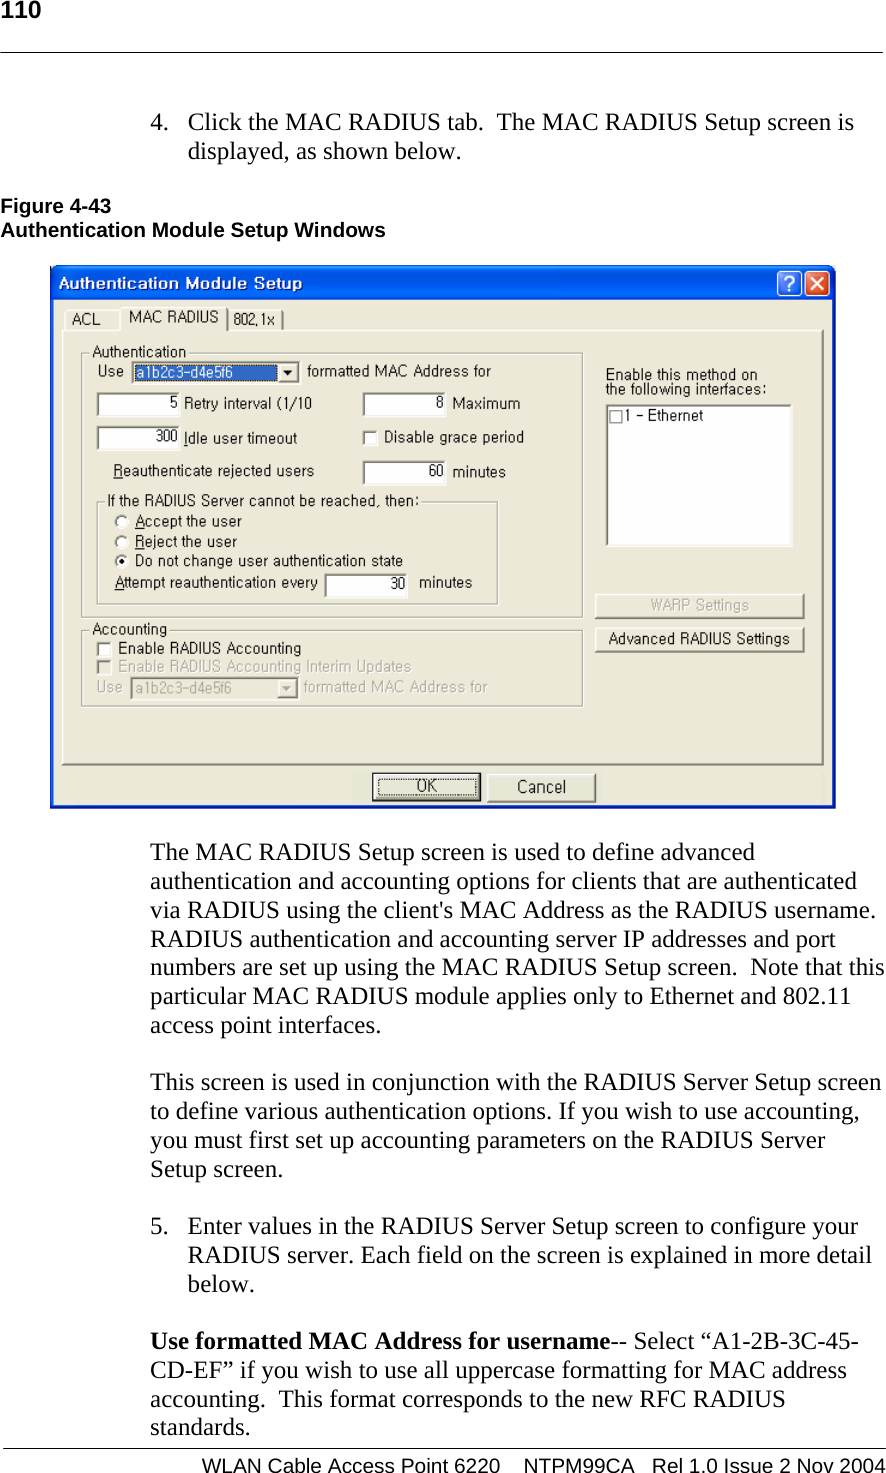   110  WLAN Cable Access Point 6220    NTPM99CA   Rel 1.0 Issue 2 Nov 2004 4. Click the MAC RADIUS tab.  The MAC RADIUS Setup screen is displayed, as shown below.  Figure 4-43 Authentication Module Setup Windows    The MAC RADIUS Setup screen is used to define advanced authentication and accounting options for clients that are authenticated via RADIUS using the client&apos;s MAC Address as the RADIUS username.  RADIUS authentication and accounting server IP addresses and port numbers are set up using the MAC RADIUS Setup screen.  Note that this particular MAC RADIUS module applies only to Ethernet and 802.11 access point interfaces.    This screen is used in conjunction with the RADIUS Server Setup screen to define various authentication options. If you wish to use accounting, you must first set up accounting parameters on the RADIUS Server Setup screen.    5. Enter values in the RADIUS Server Setup screen to configure your RADIUS server. Each field on the screen is explained in more detail below.  Use formatted MAC Address for username-- Select “A1-2B-3C-45-CD-EF” if you wish to use all uppercase formatting for MAC address accounting.  This format corresponds to the new RFC RADIUS standards.  